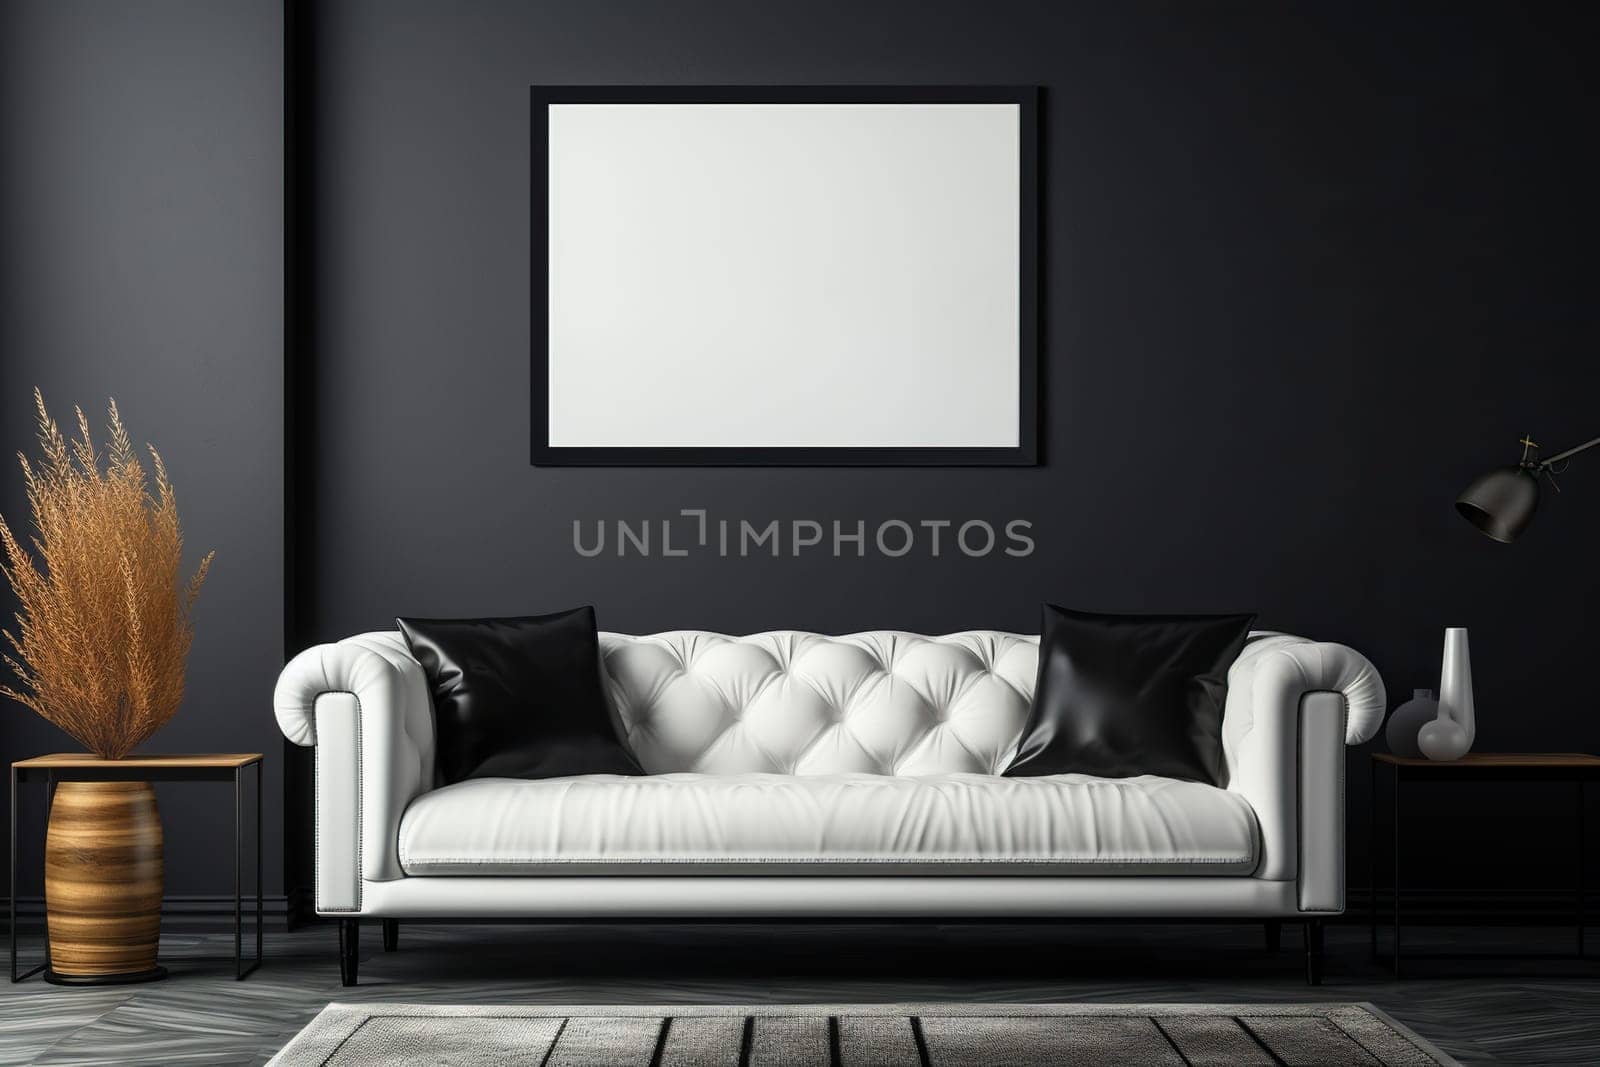 Modern white leather sofa with legs and cushions in a minimalist living room with black walls with a picture. Modern living room interior.